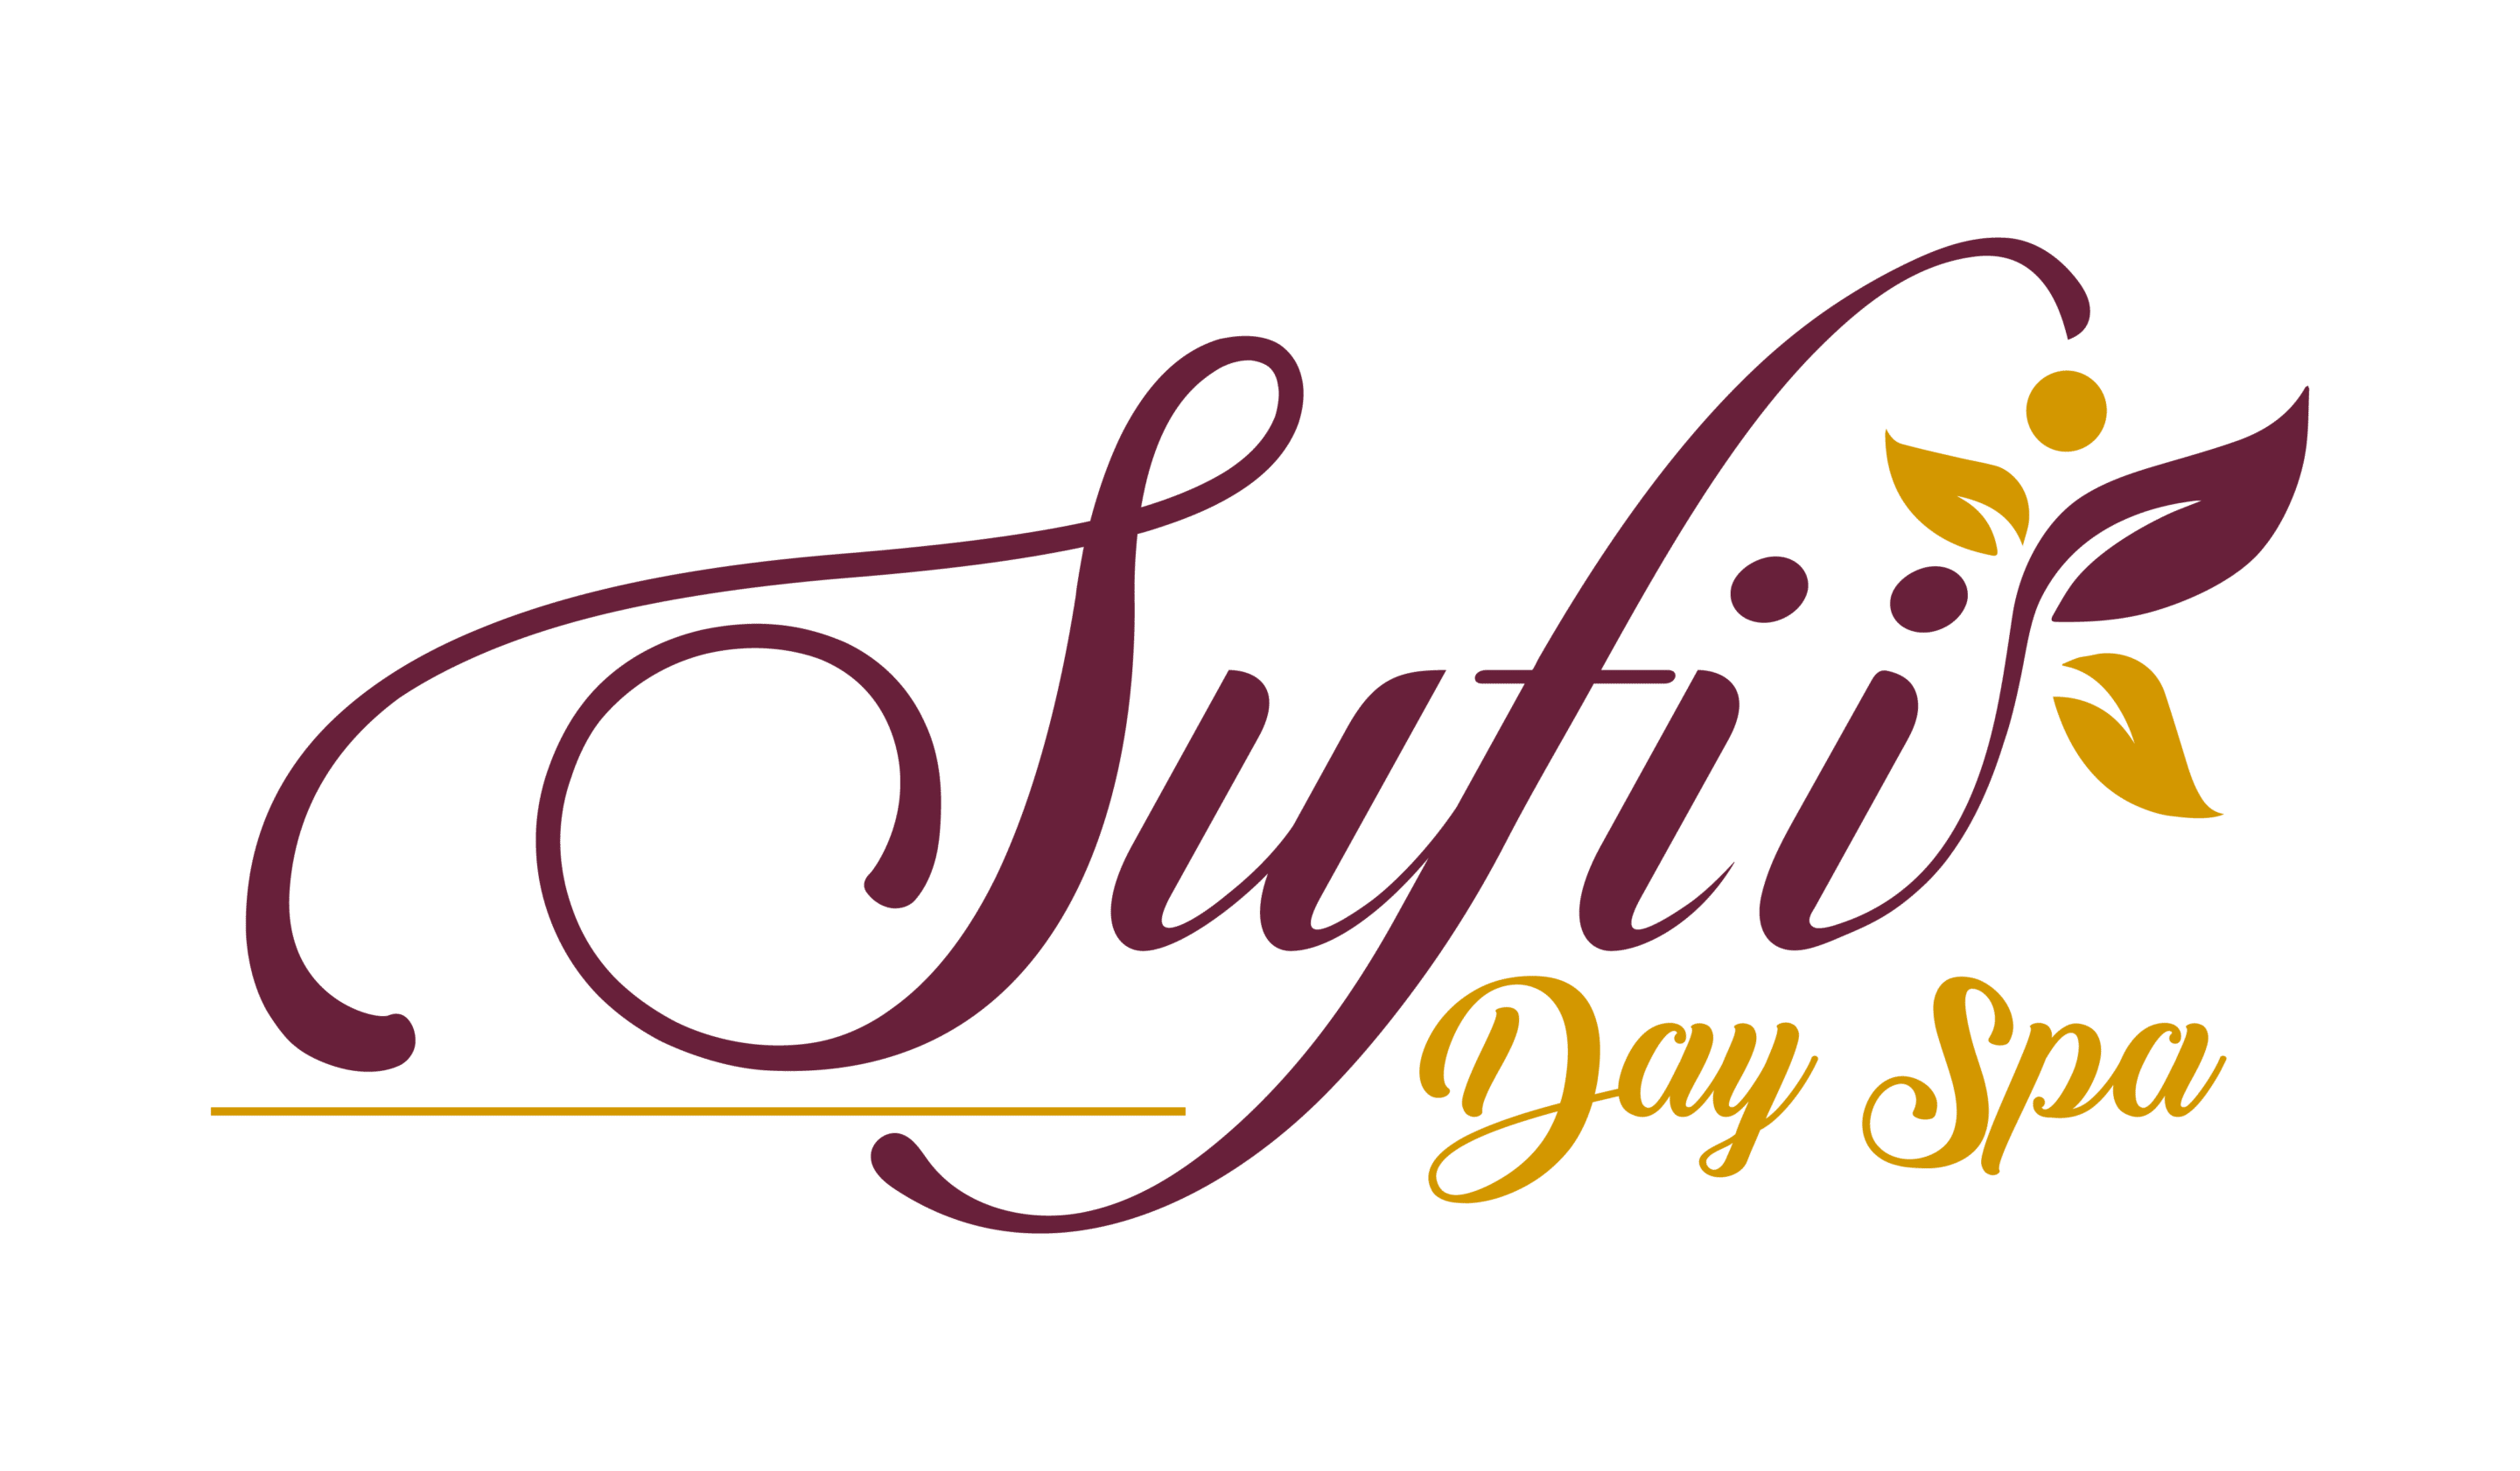 Sufii Day Spa